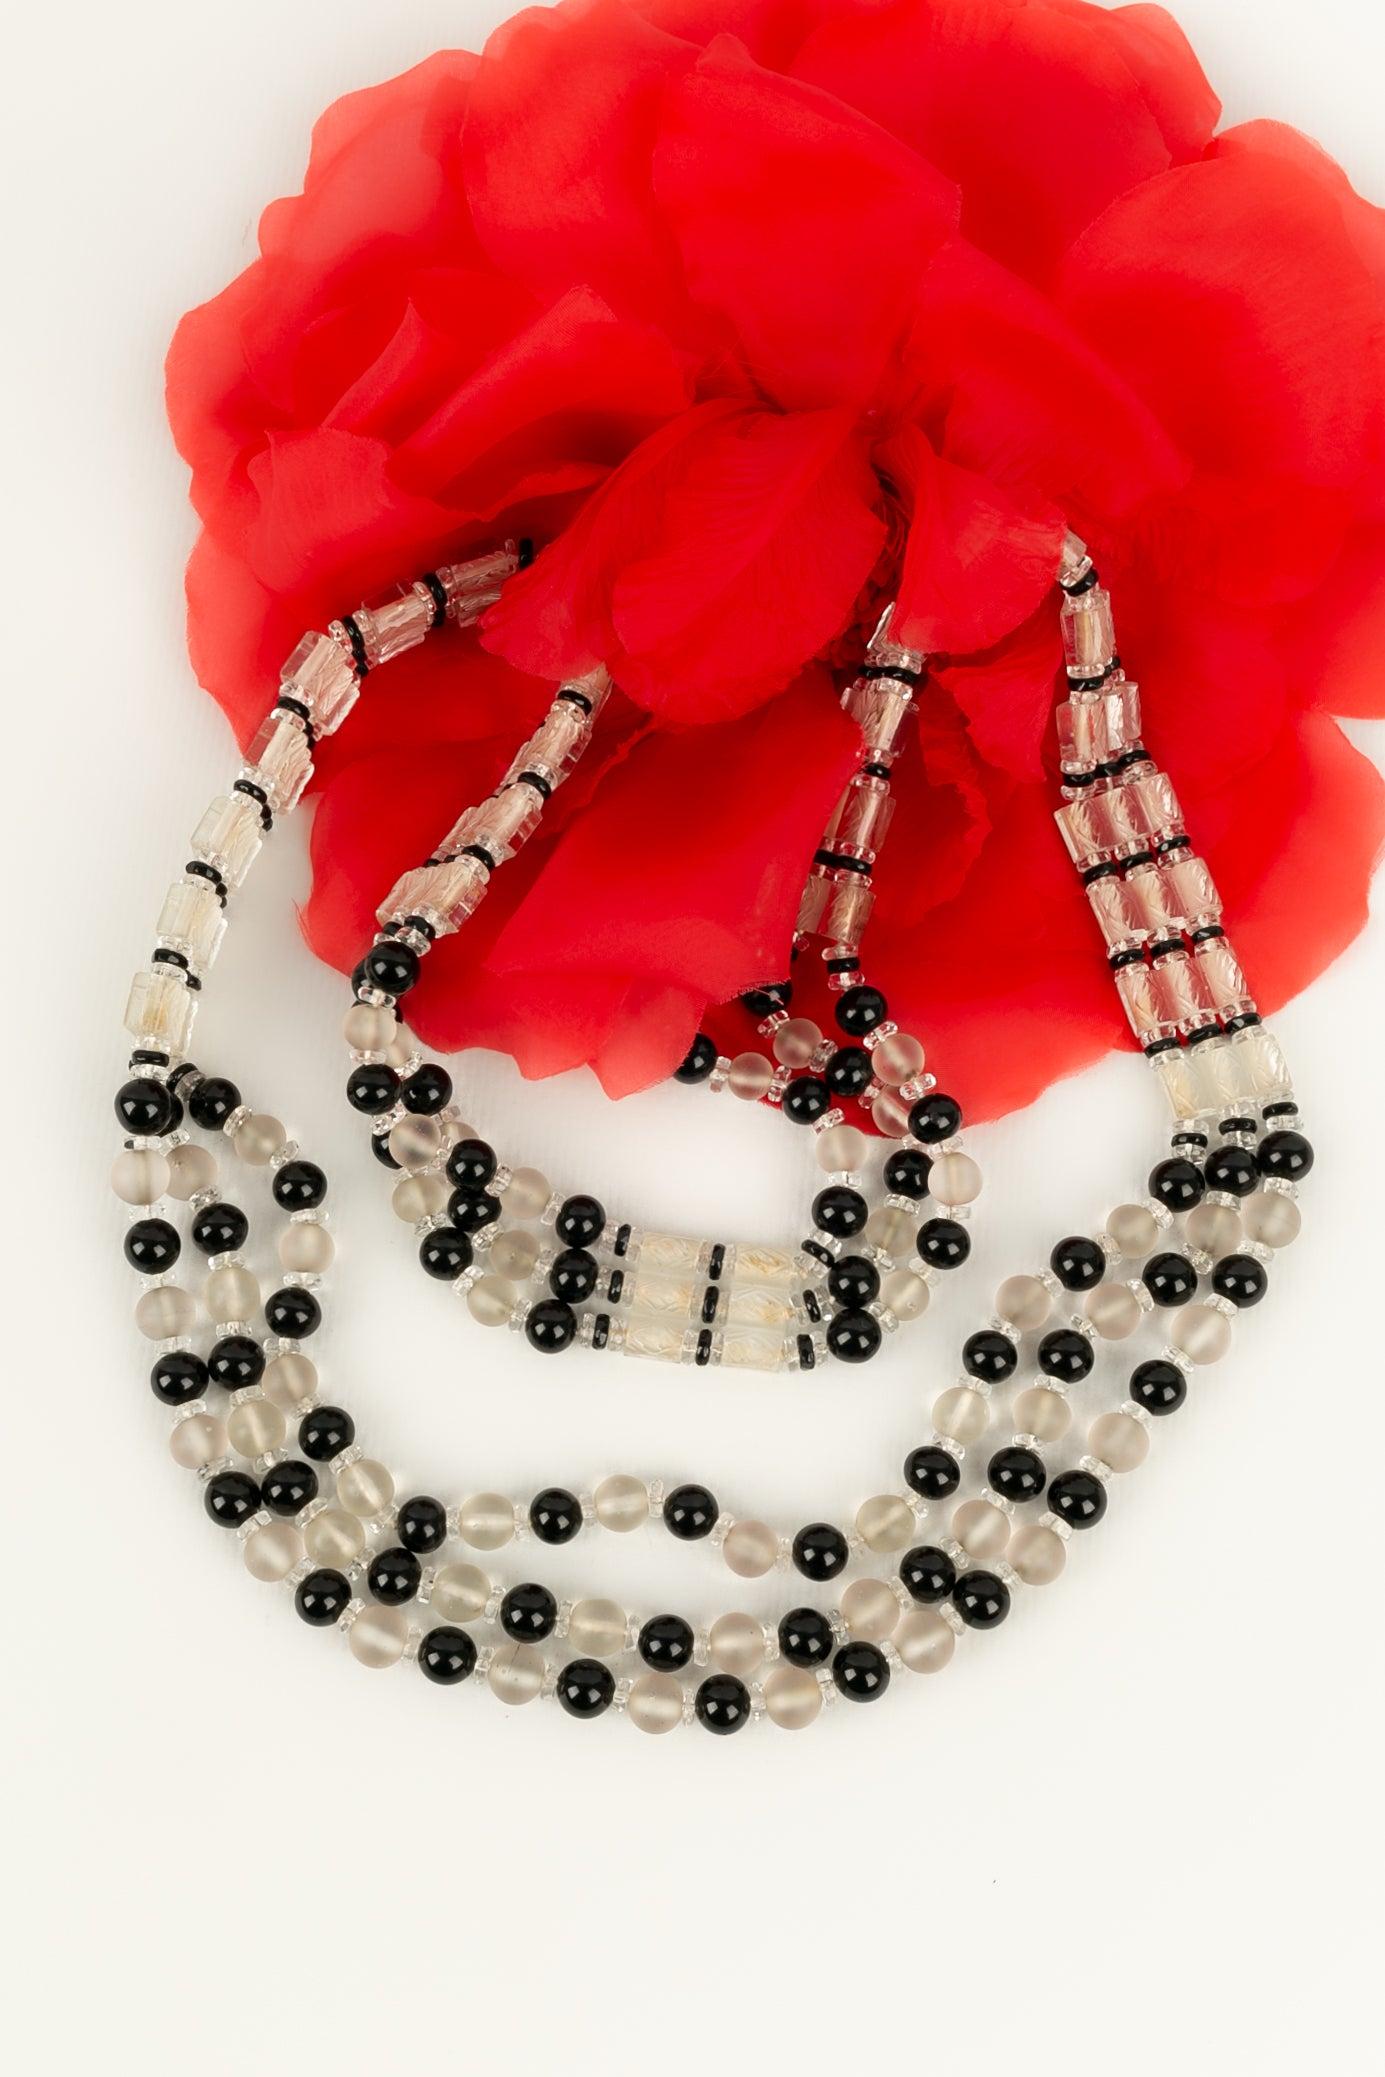 Rousselet Necklace in Transparent and Black Glass Pearls, 1920s For Sale 4